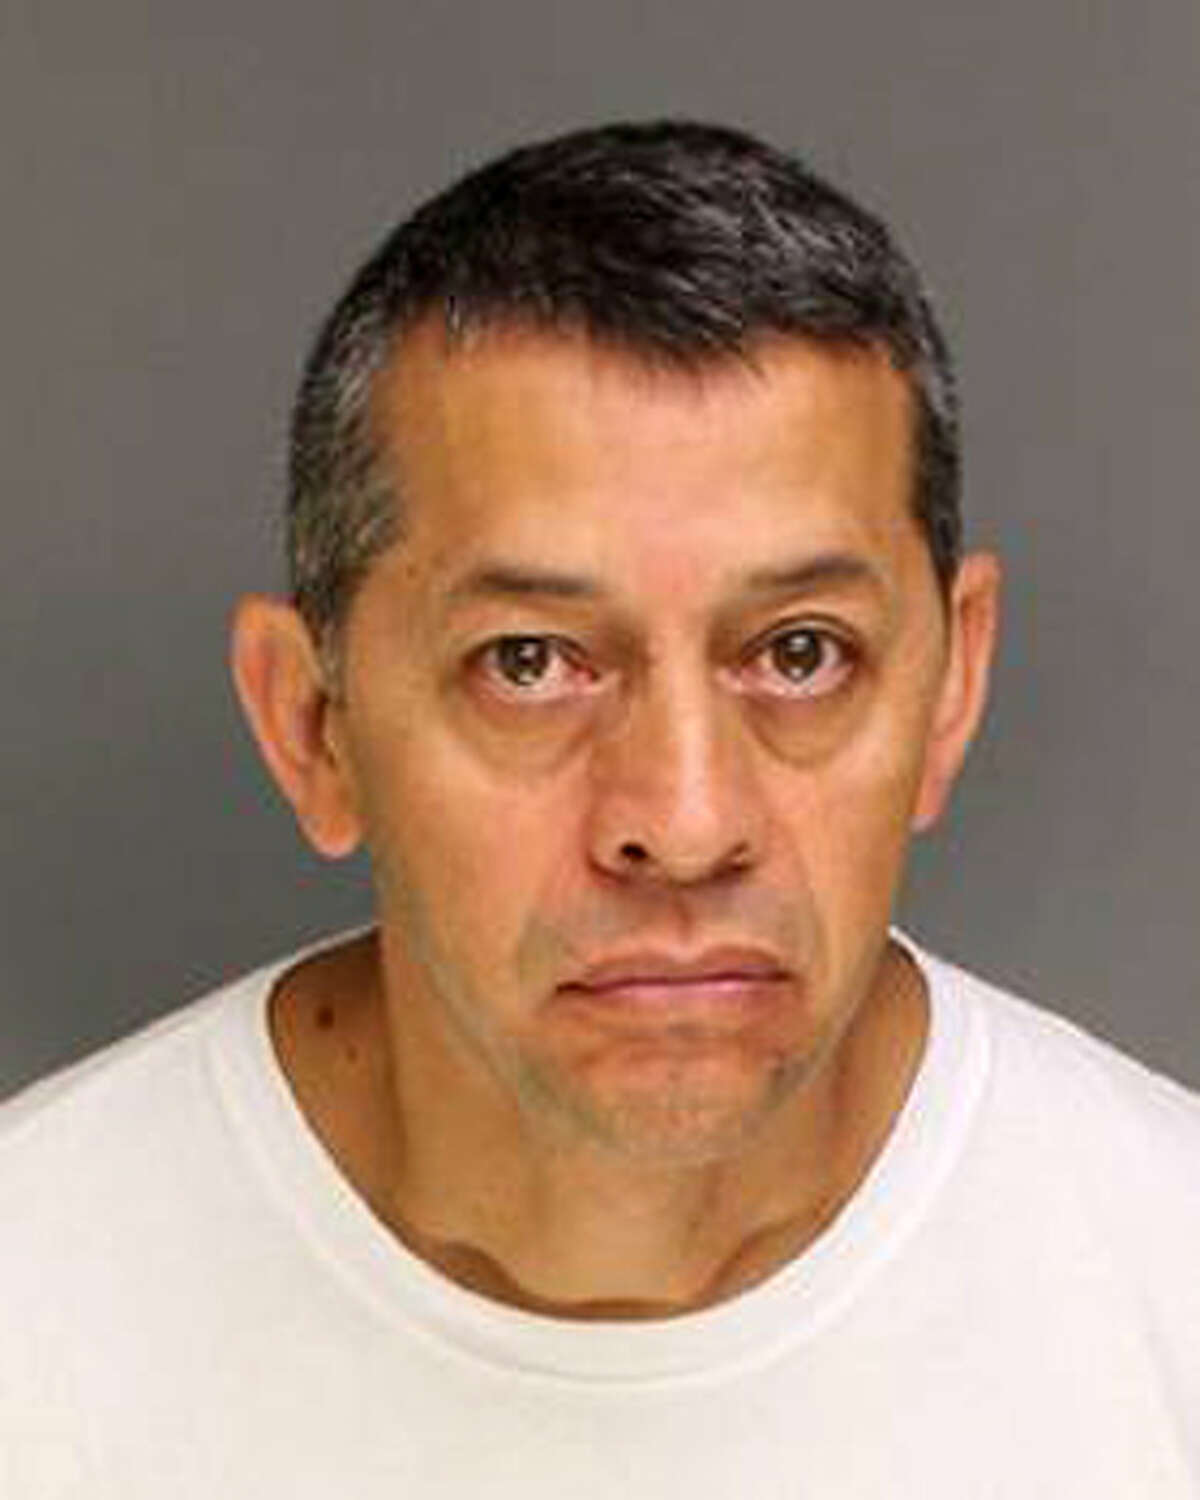 Gonzalo Flores was charged with fourth-degree sexual assault. Flores is accused of engaging in sexually inappropriate behavior with a patient while the suspect was working as a certified nursing assistant at St. VincentâÄôs Medical Center in Bridgeport, Conn.